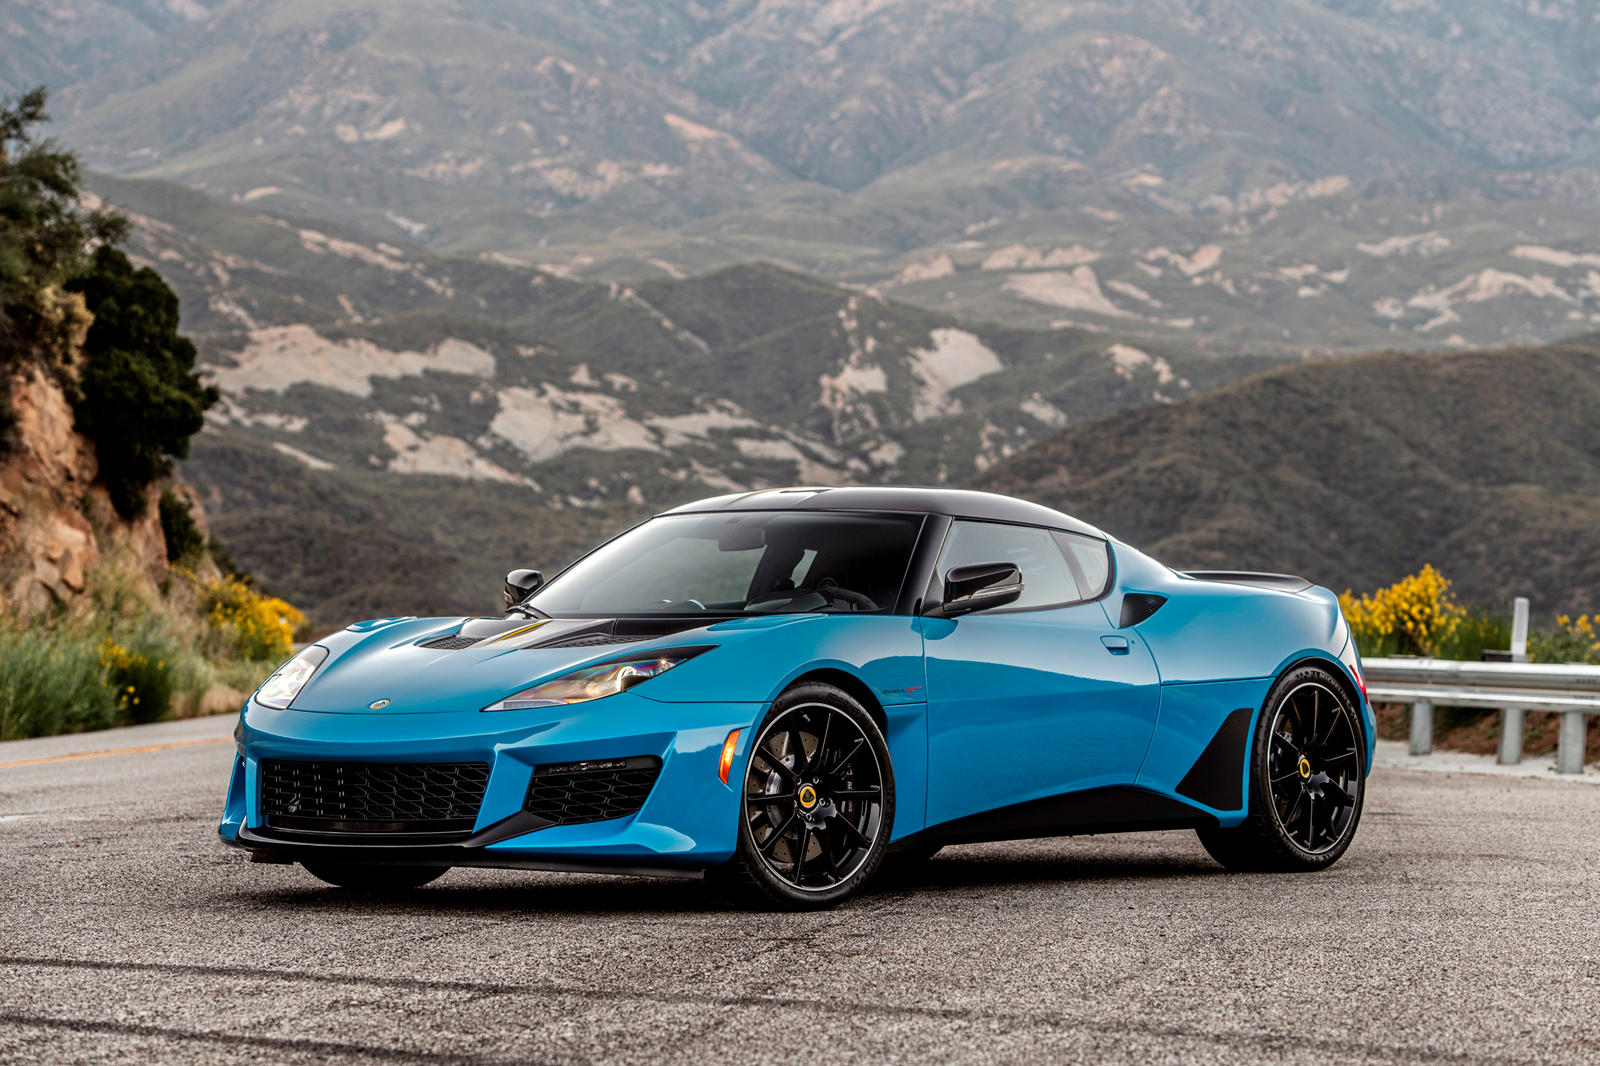 2021 Lotus Evora GT Front Angle View